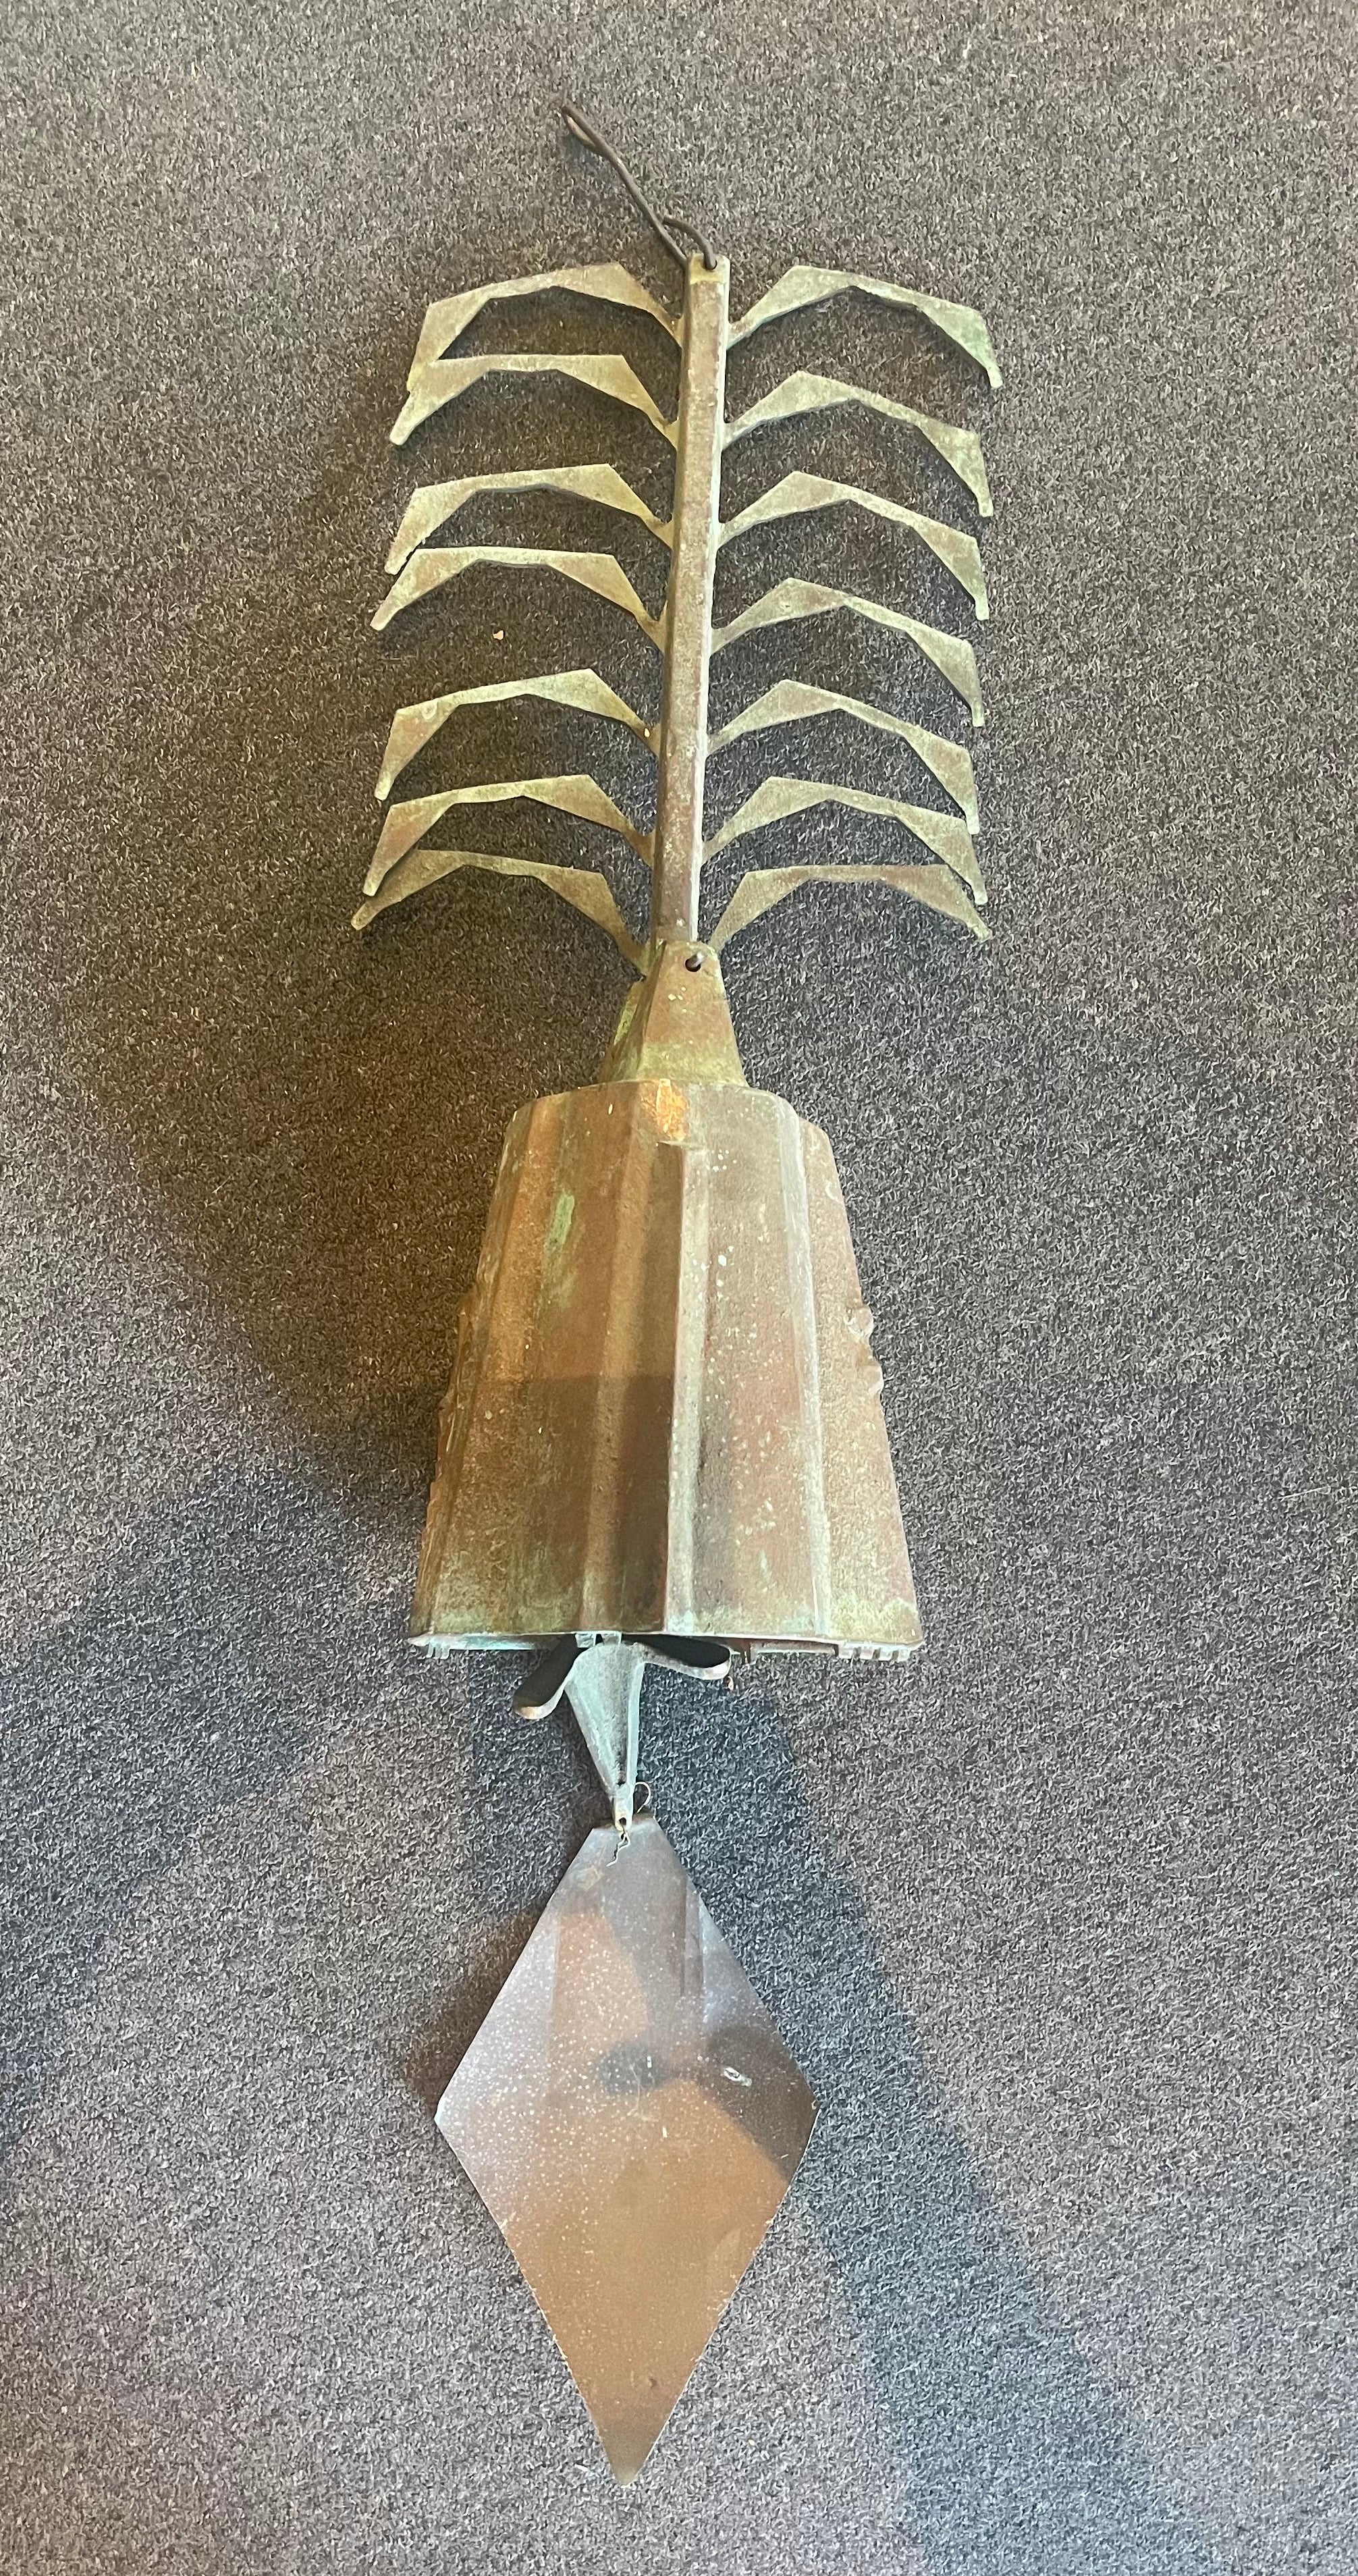 Massive bronze wind chime / bell by Paolo Soleri for Cosanti, circa 1970s. The piece is the largest Soleri bell that I have ever seen! The total length is 43.5